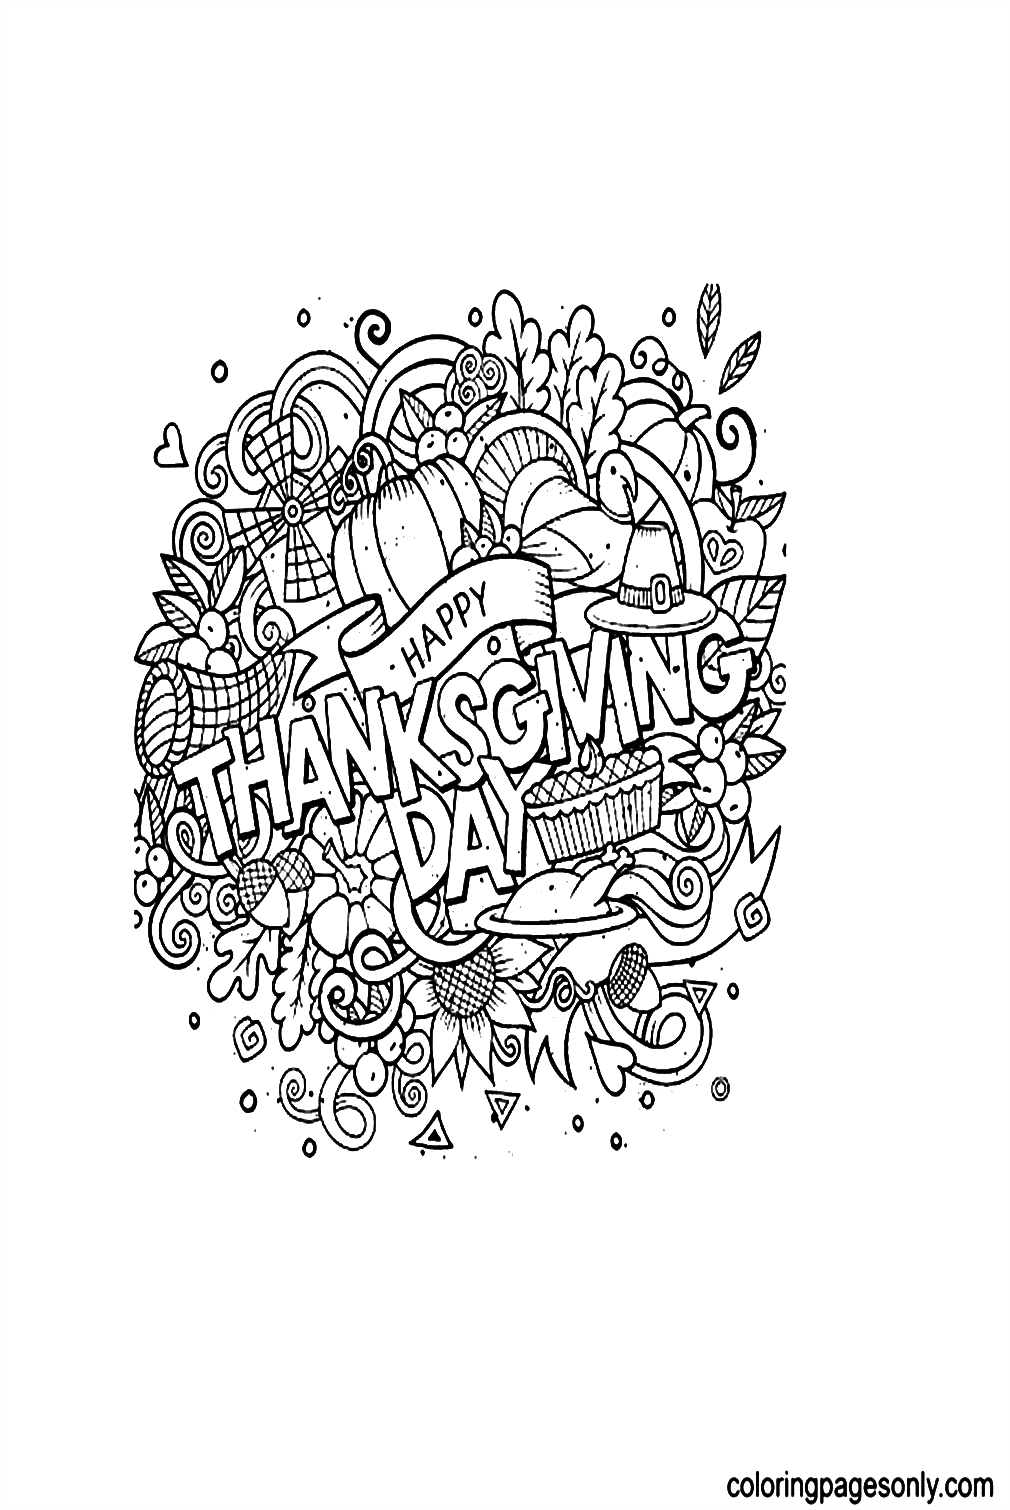 Happy Thanksgivinges Free Coloring Pages